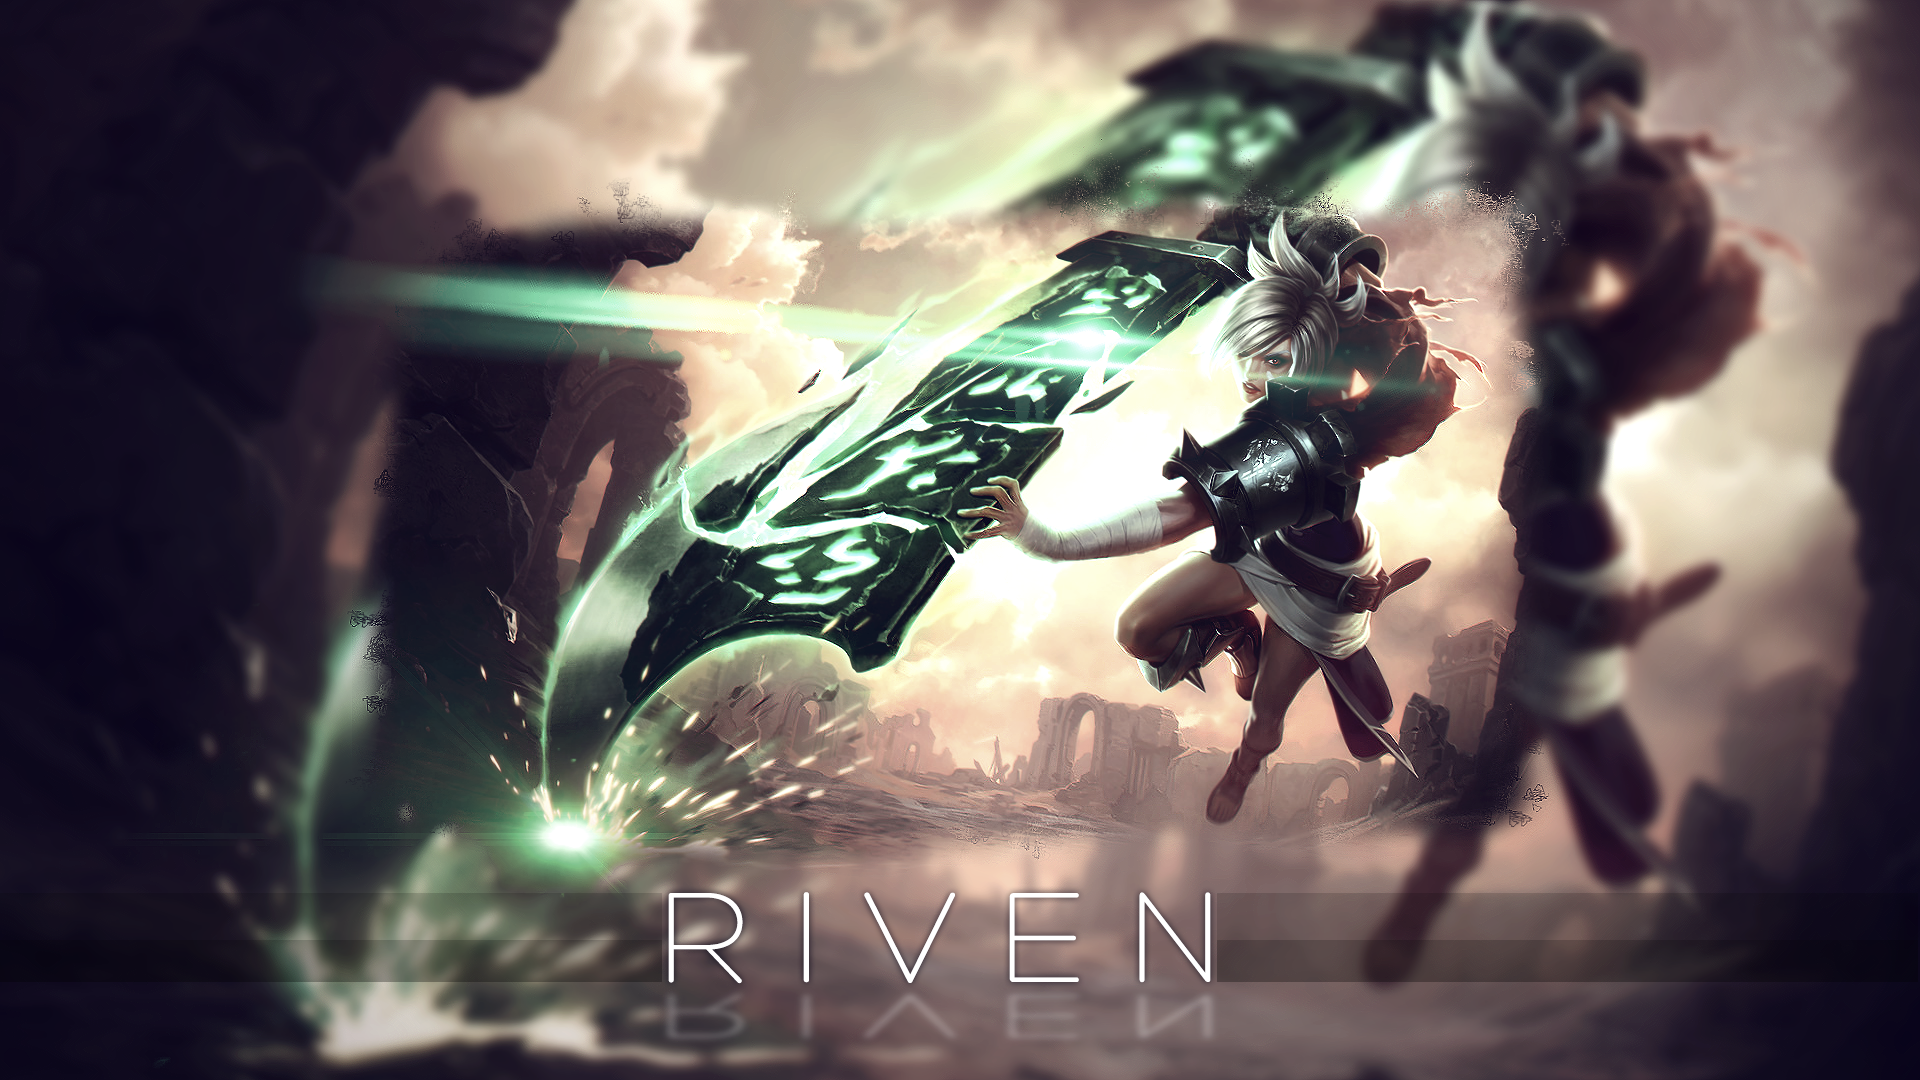 General 1920x1080 League of Legends video games Riven (League of Legends) fantasy girl warrior PC gaming video game art video game girls women with swords girls with guns fantasy art